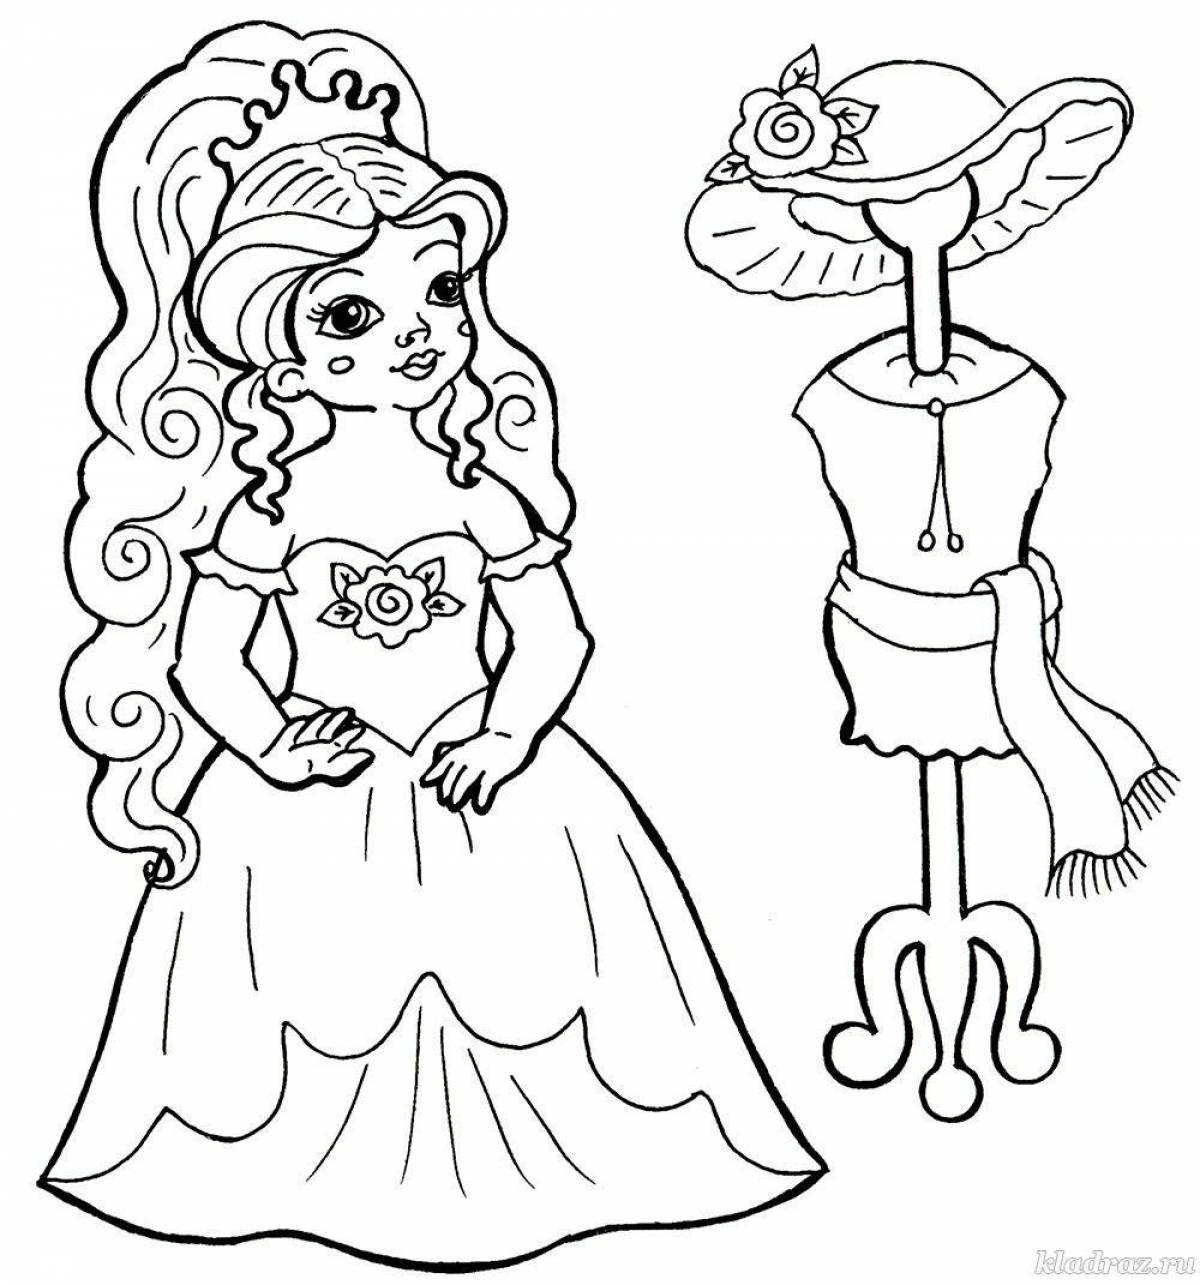 Dazzling princess coloring book for kids 5-6 years old